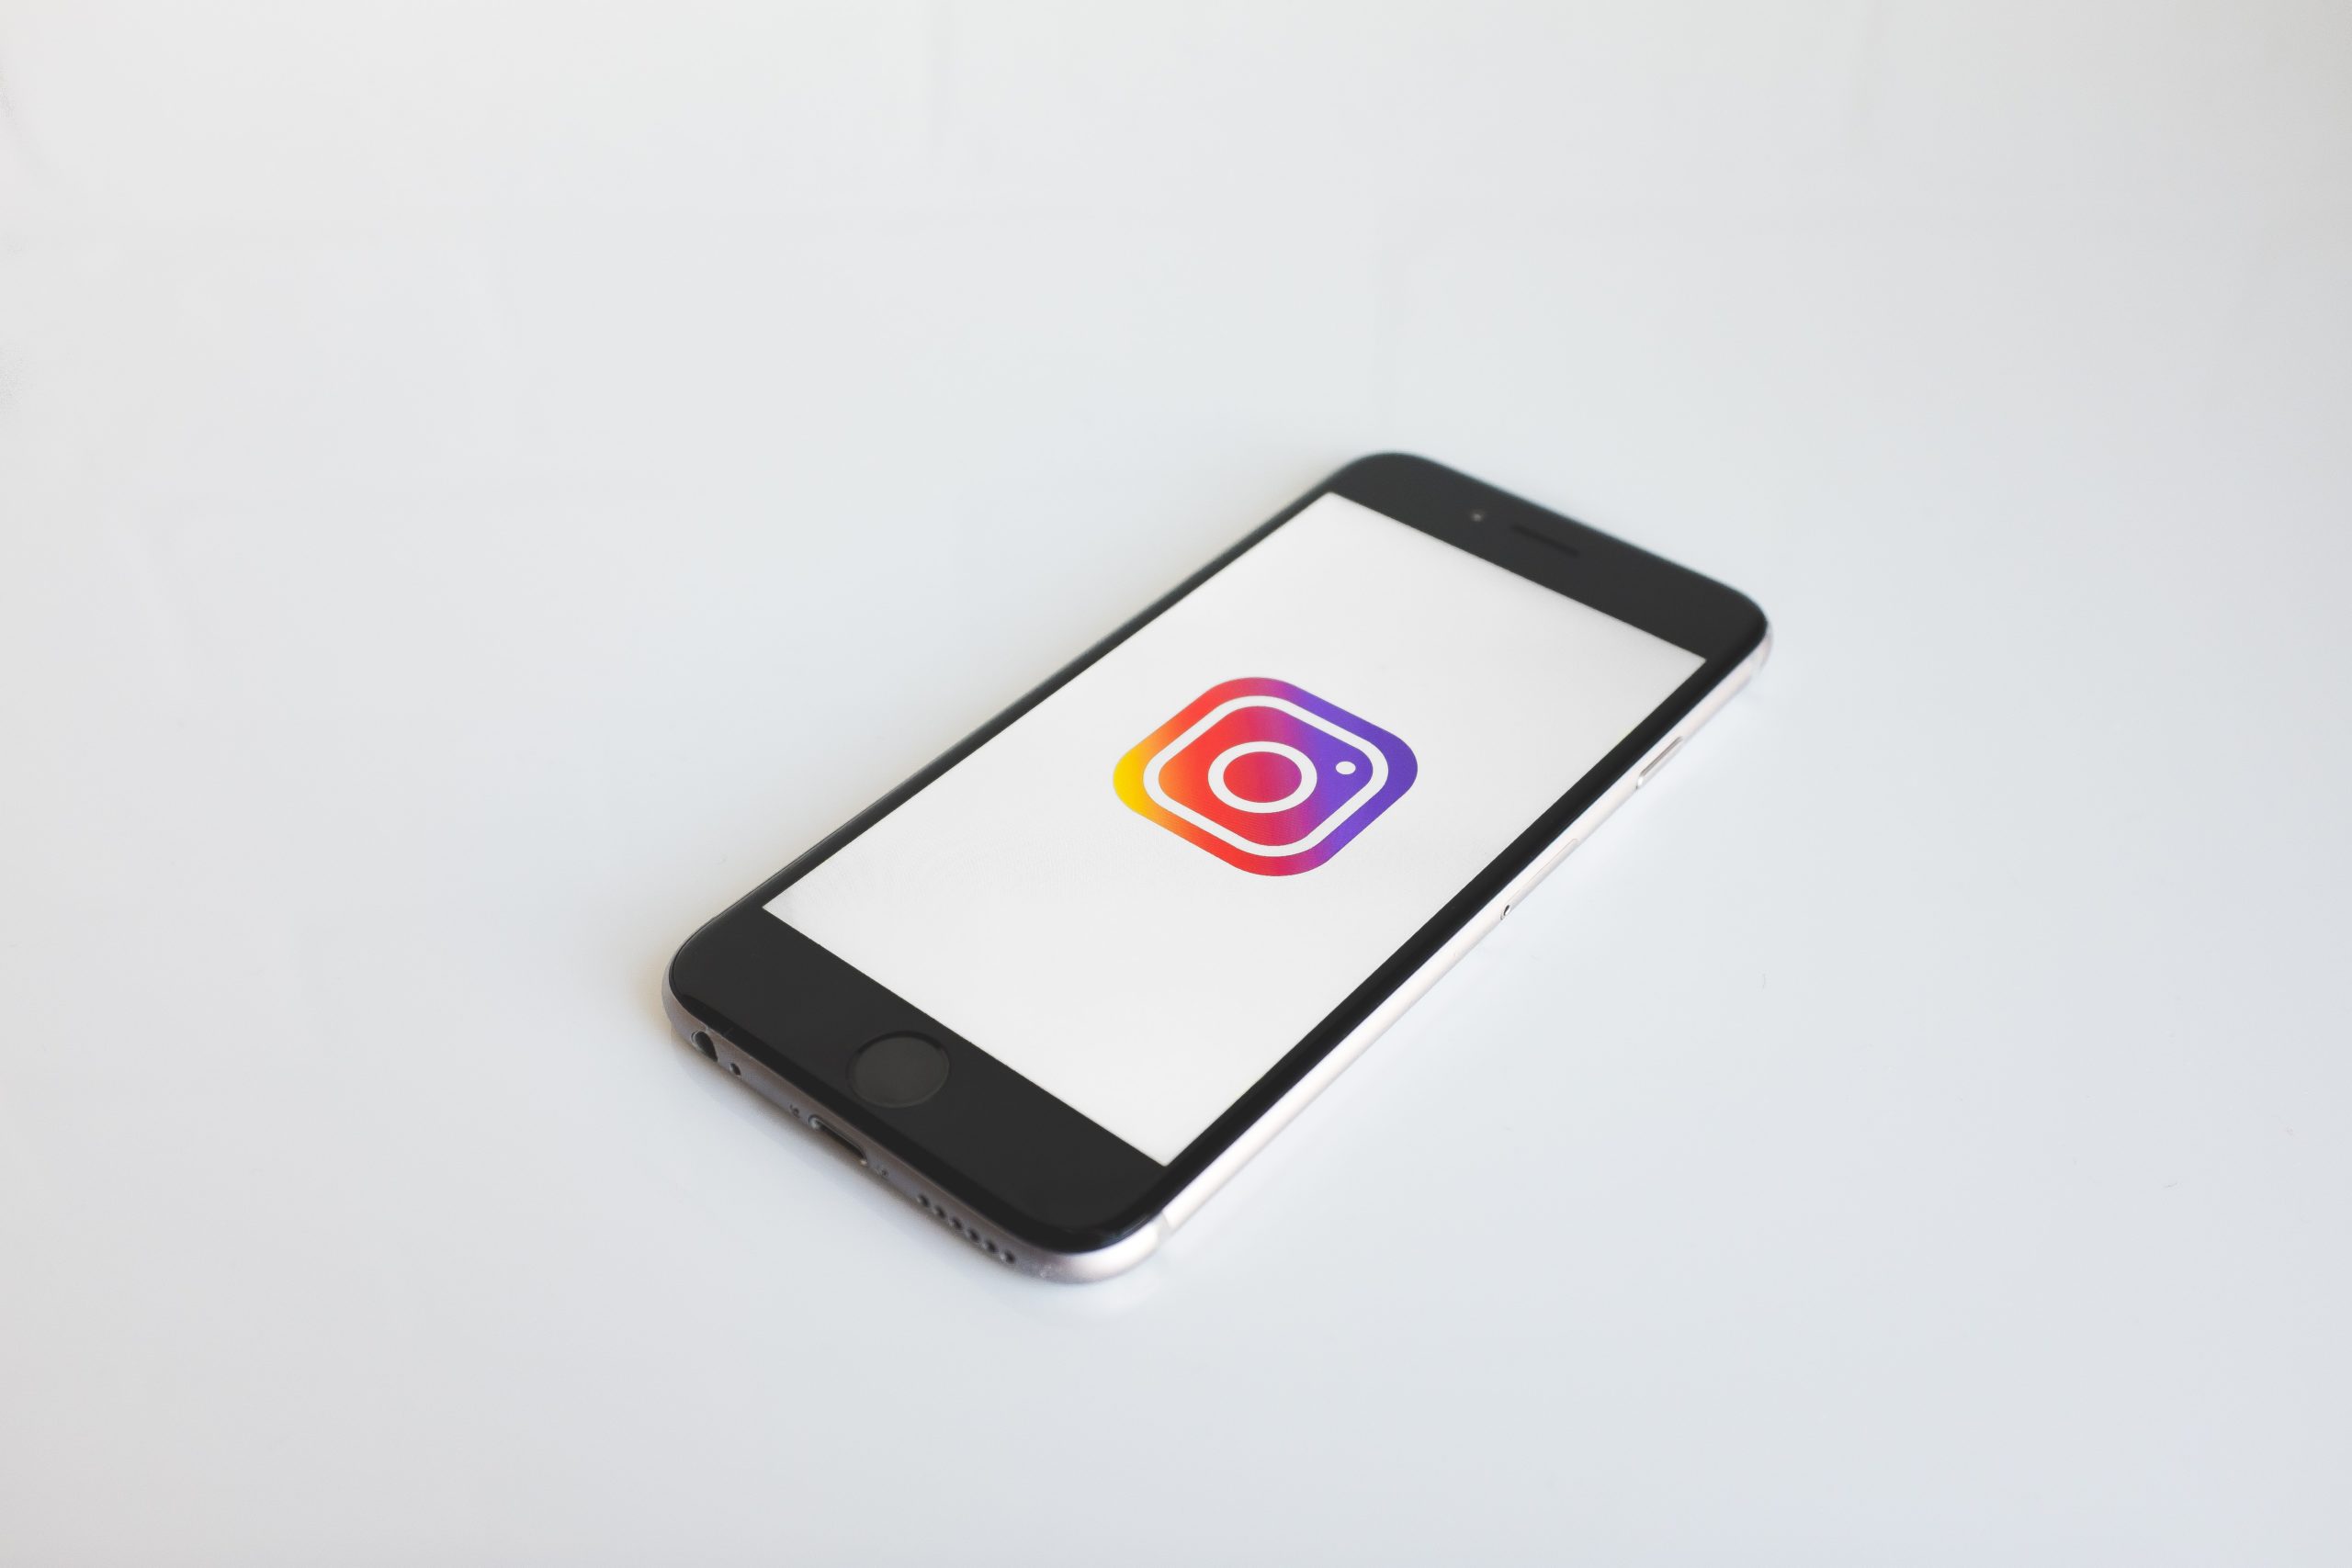 Instagram introduced Three New Features to Counter Cyberbullying